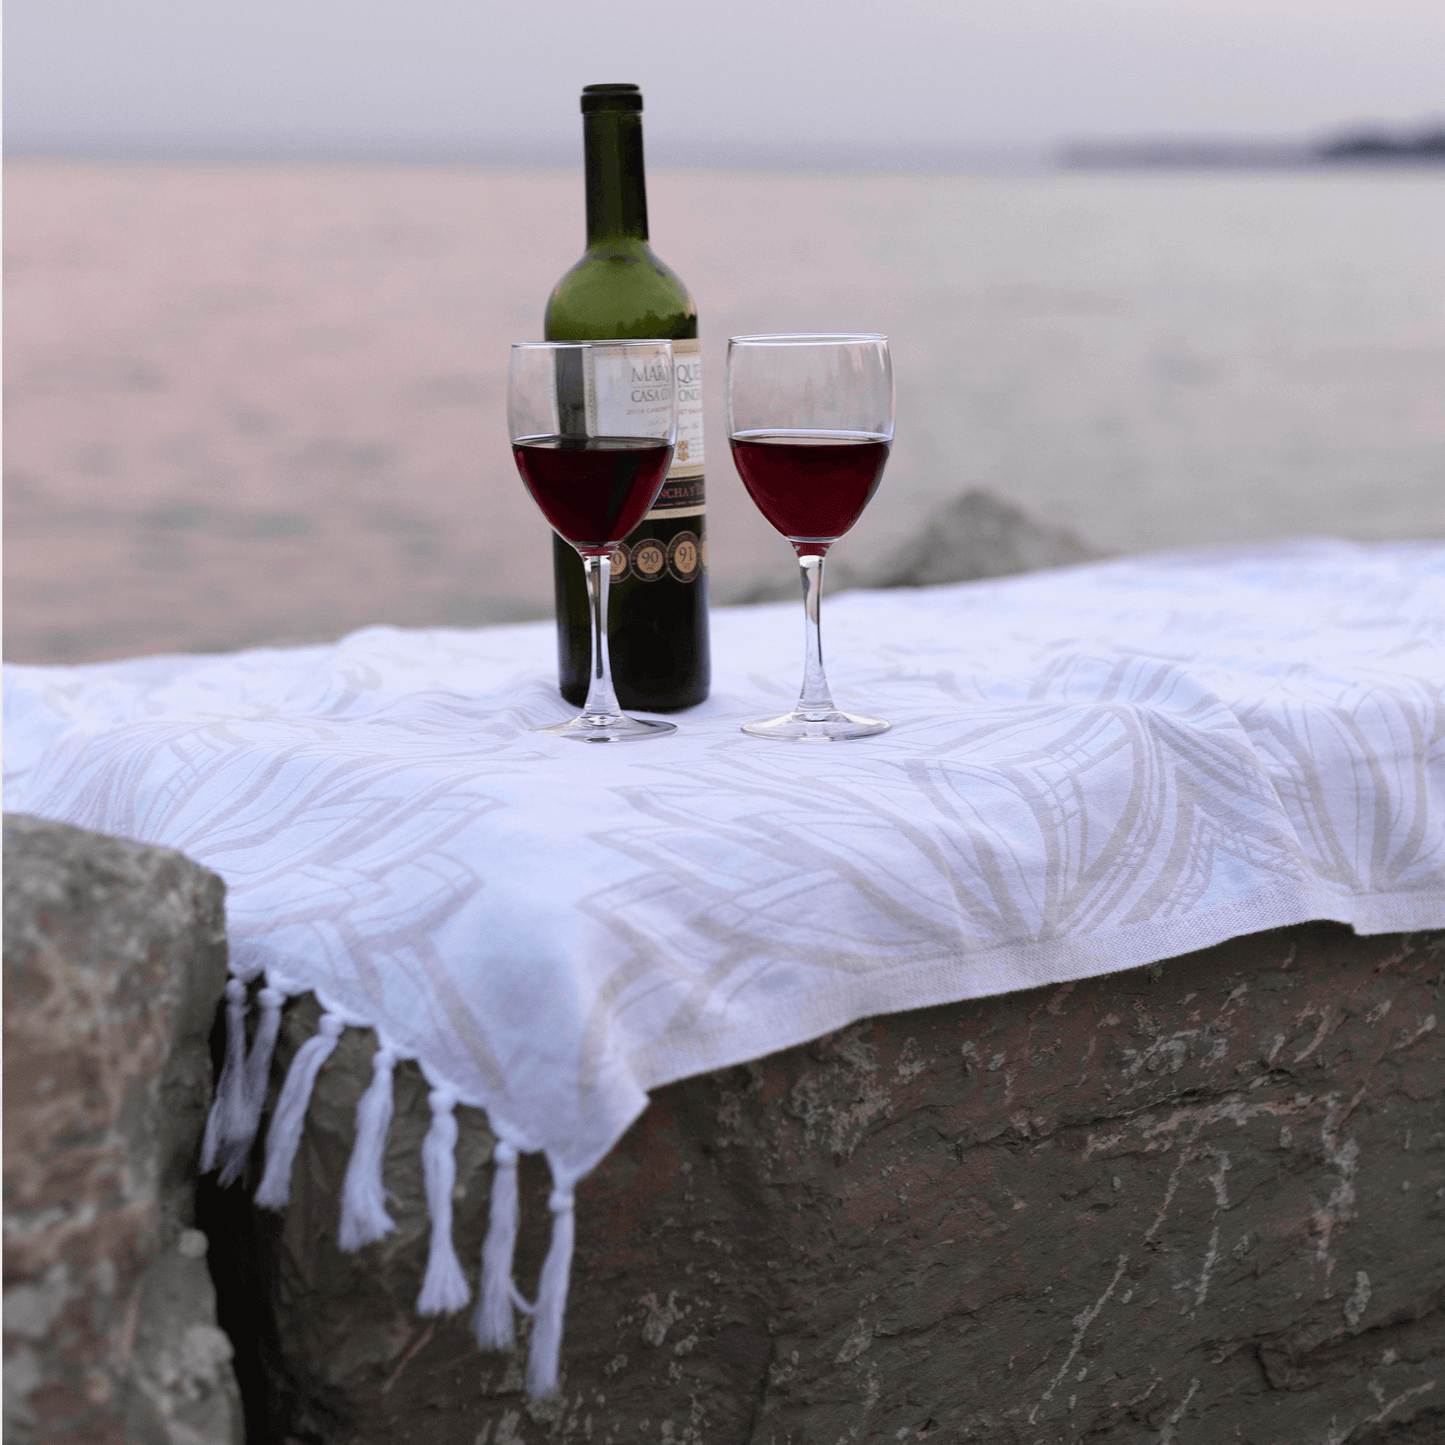 Turkish towels used as a picnic blanket neat the water with wine